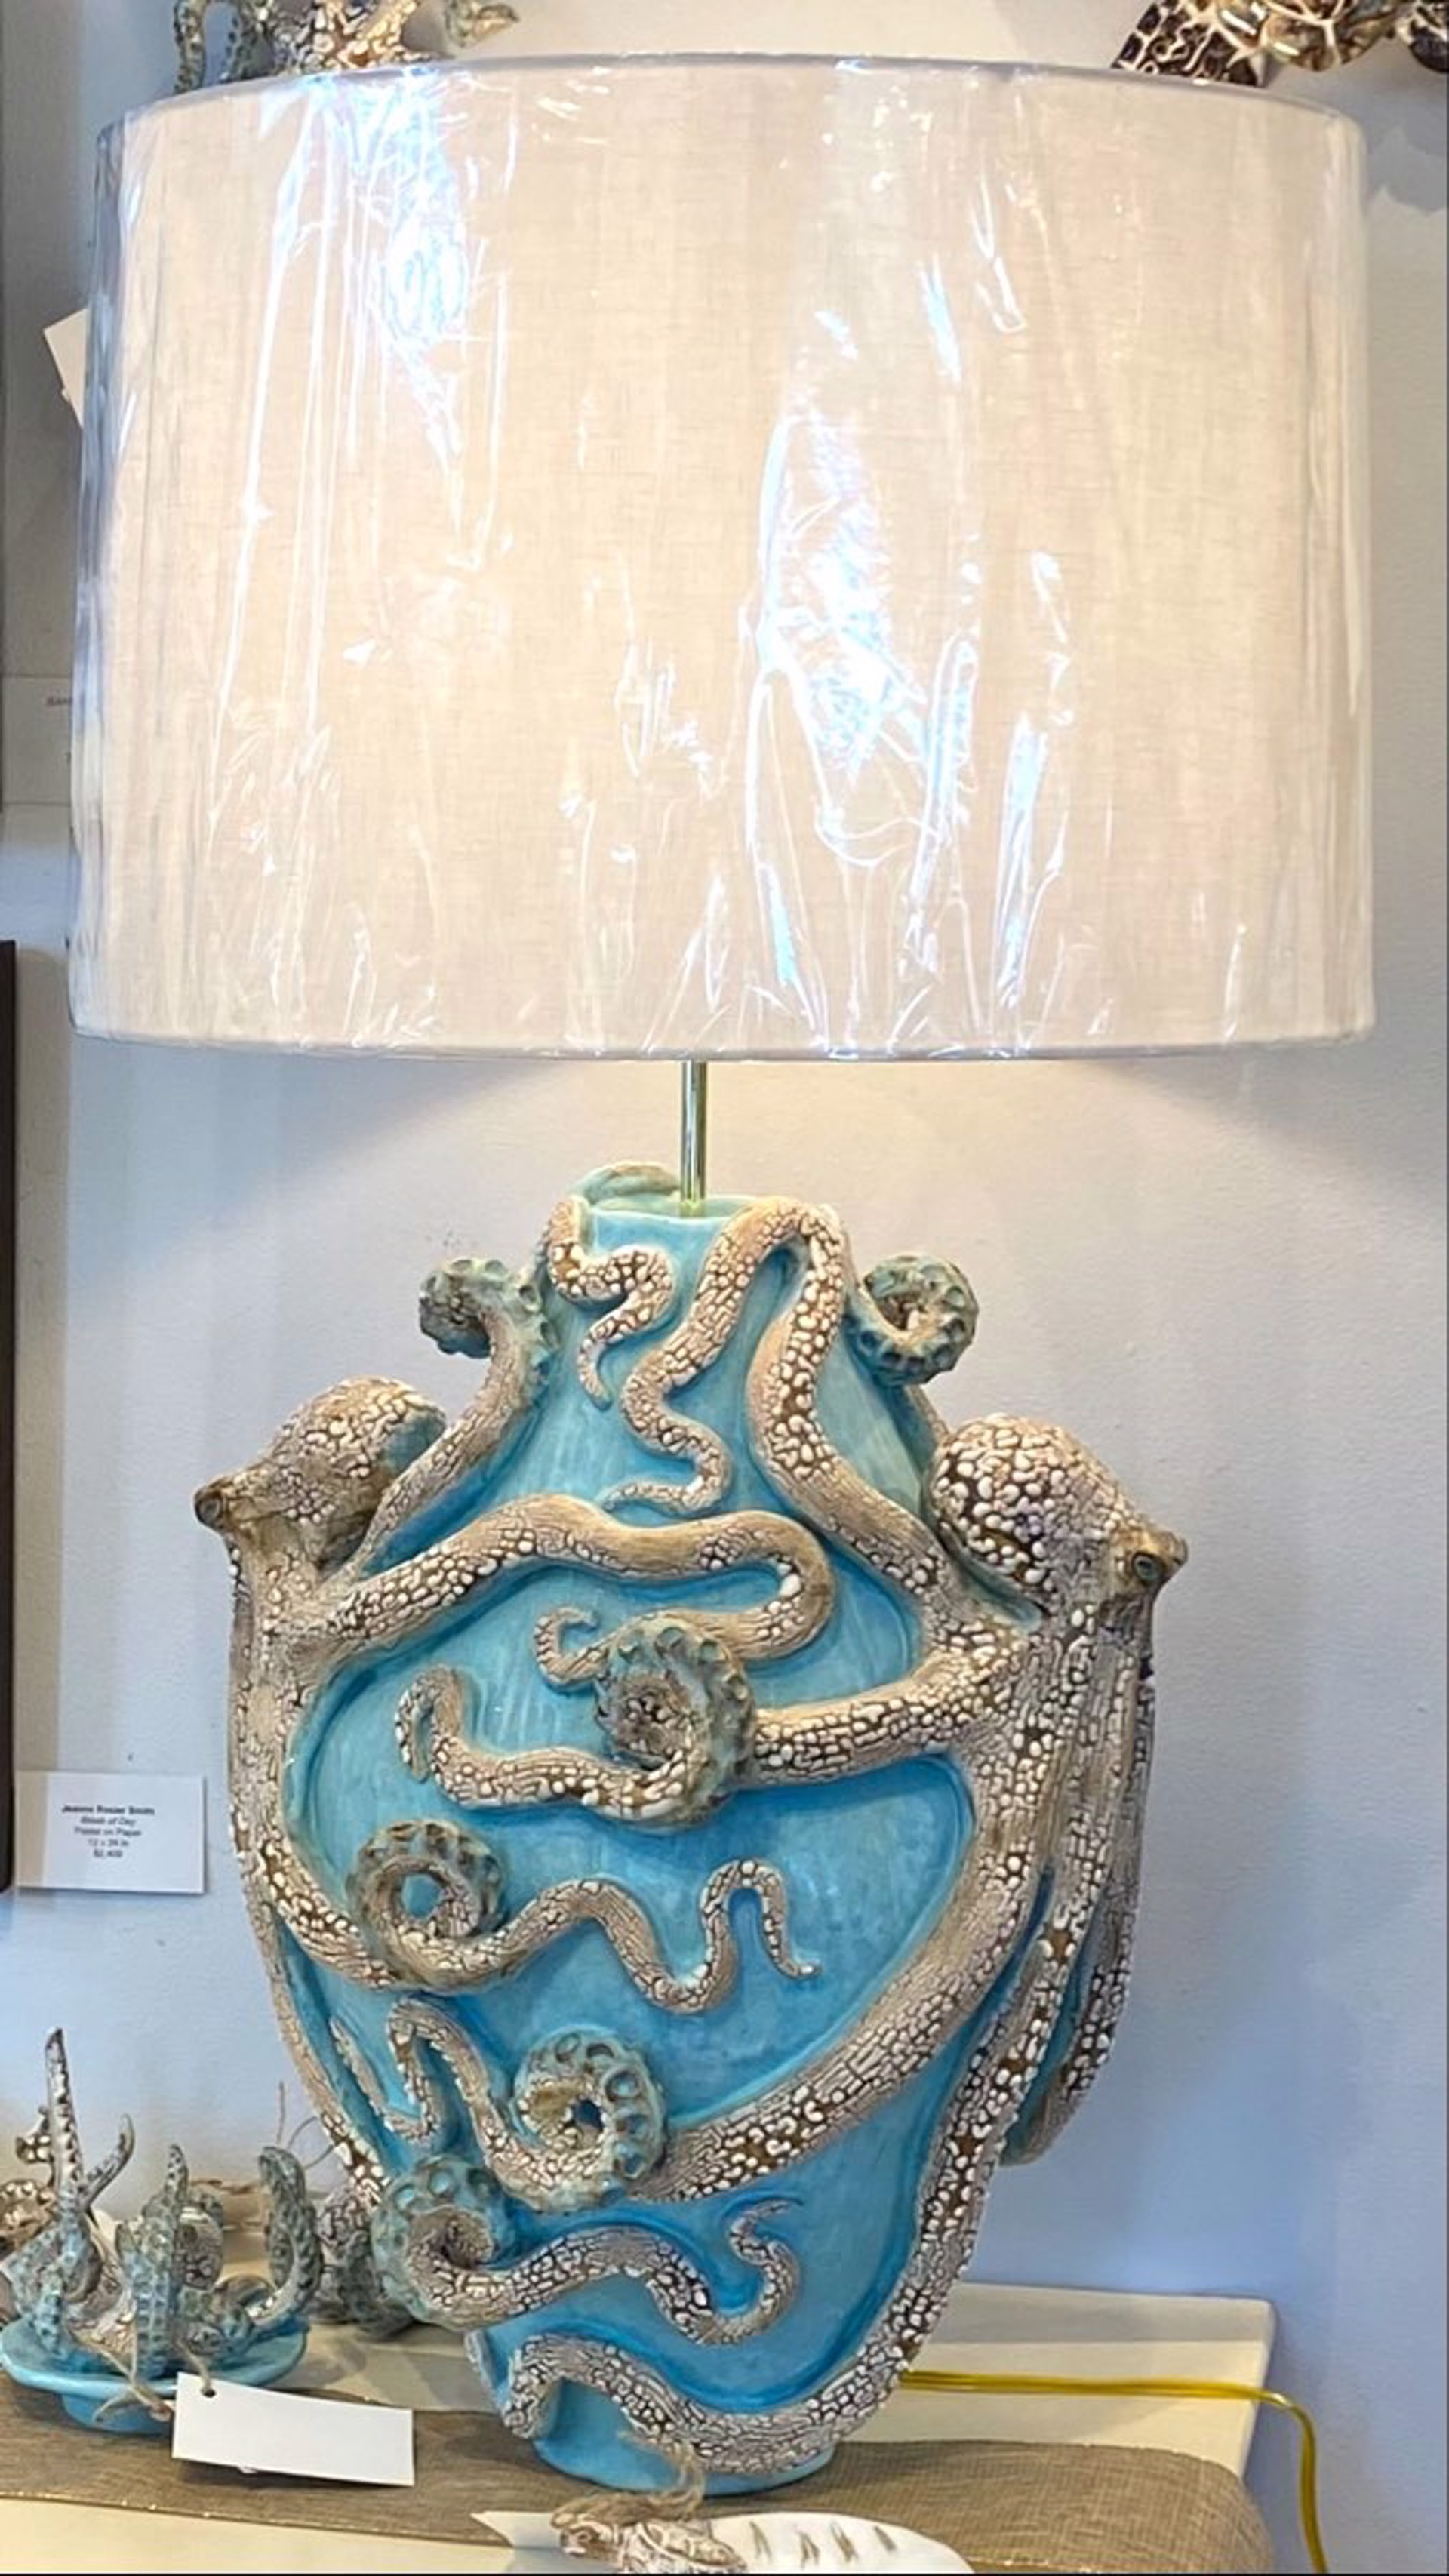 SG22-73  Octopus Lamp (Caribbean Blue) with shade 33”x17” by Shayne Greco